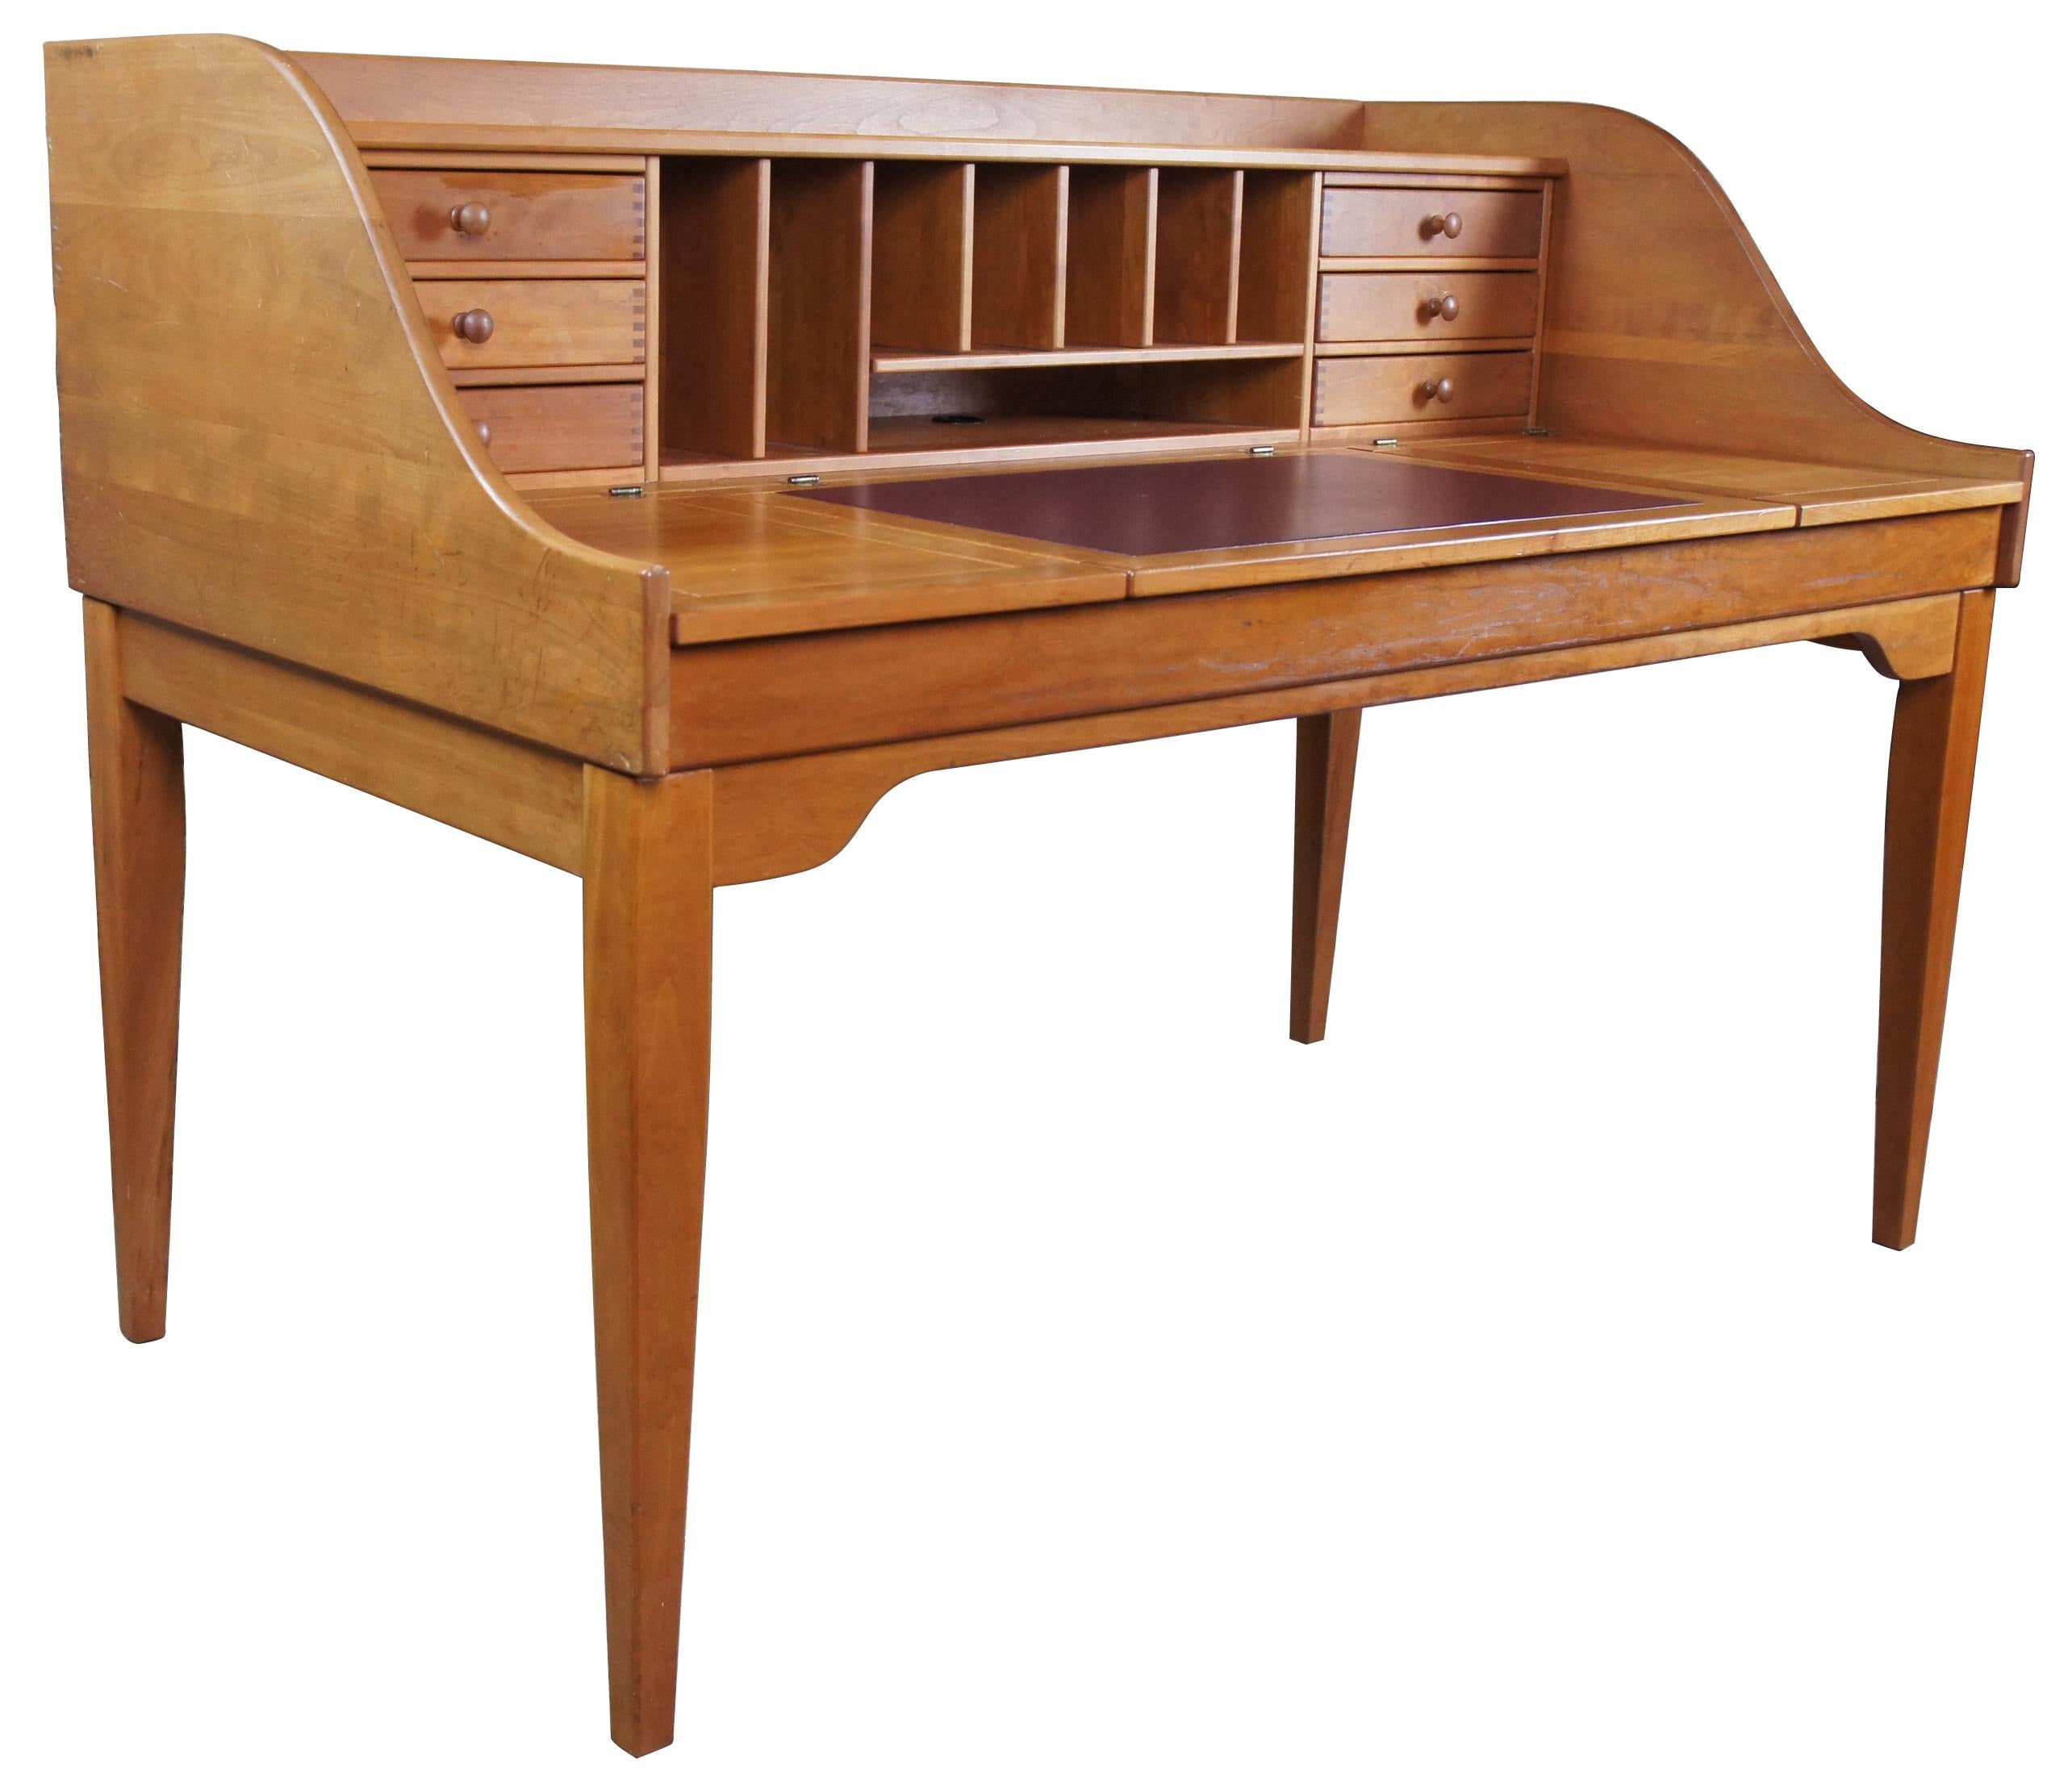 An incredible desk by Holmes County Chair Company. Made from solid cherry with a minimalist streamline shape. Features six fingertailed drawers along the back and cubbies for storage. Table surface is leather lined along the center and features dual